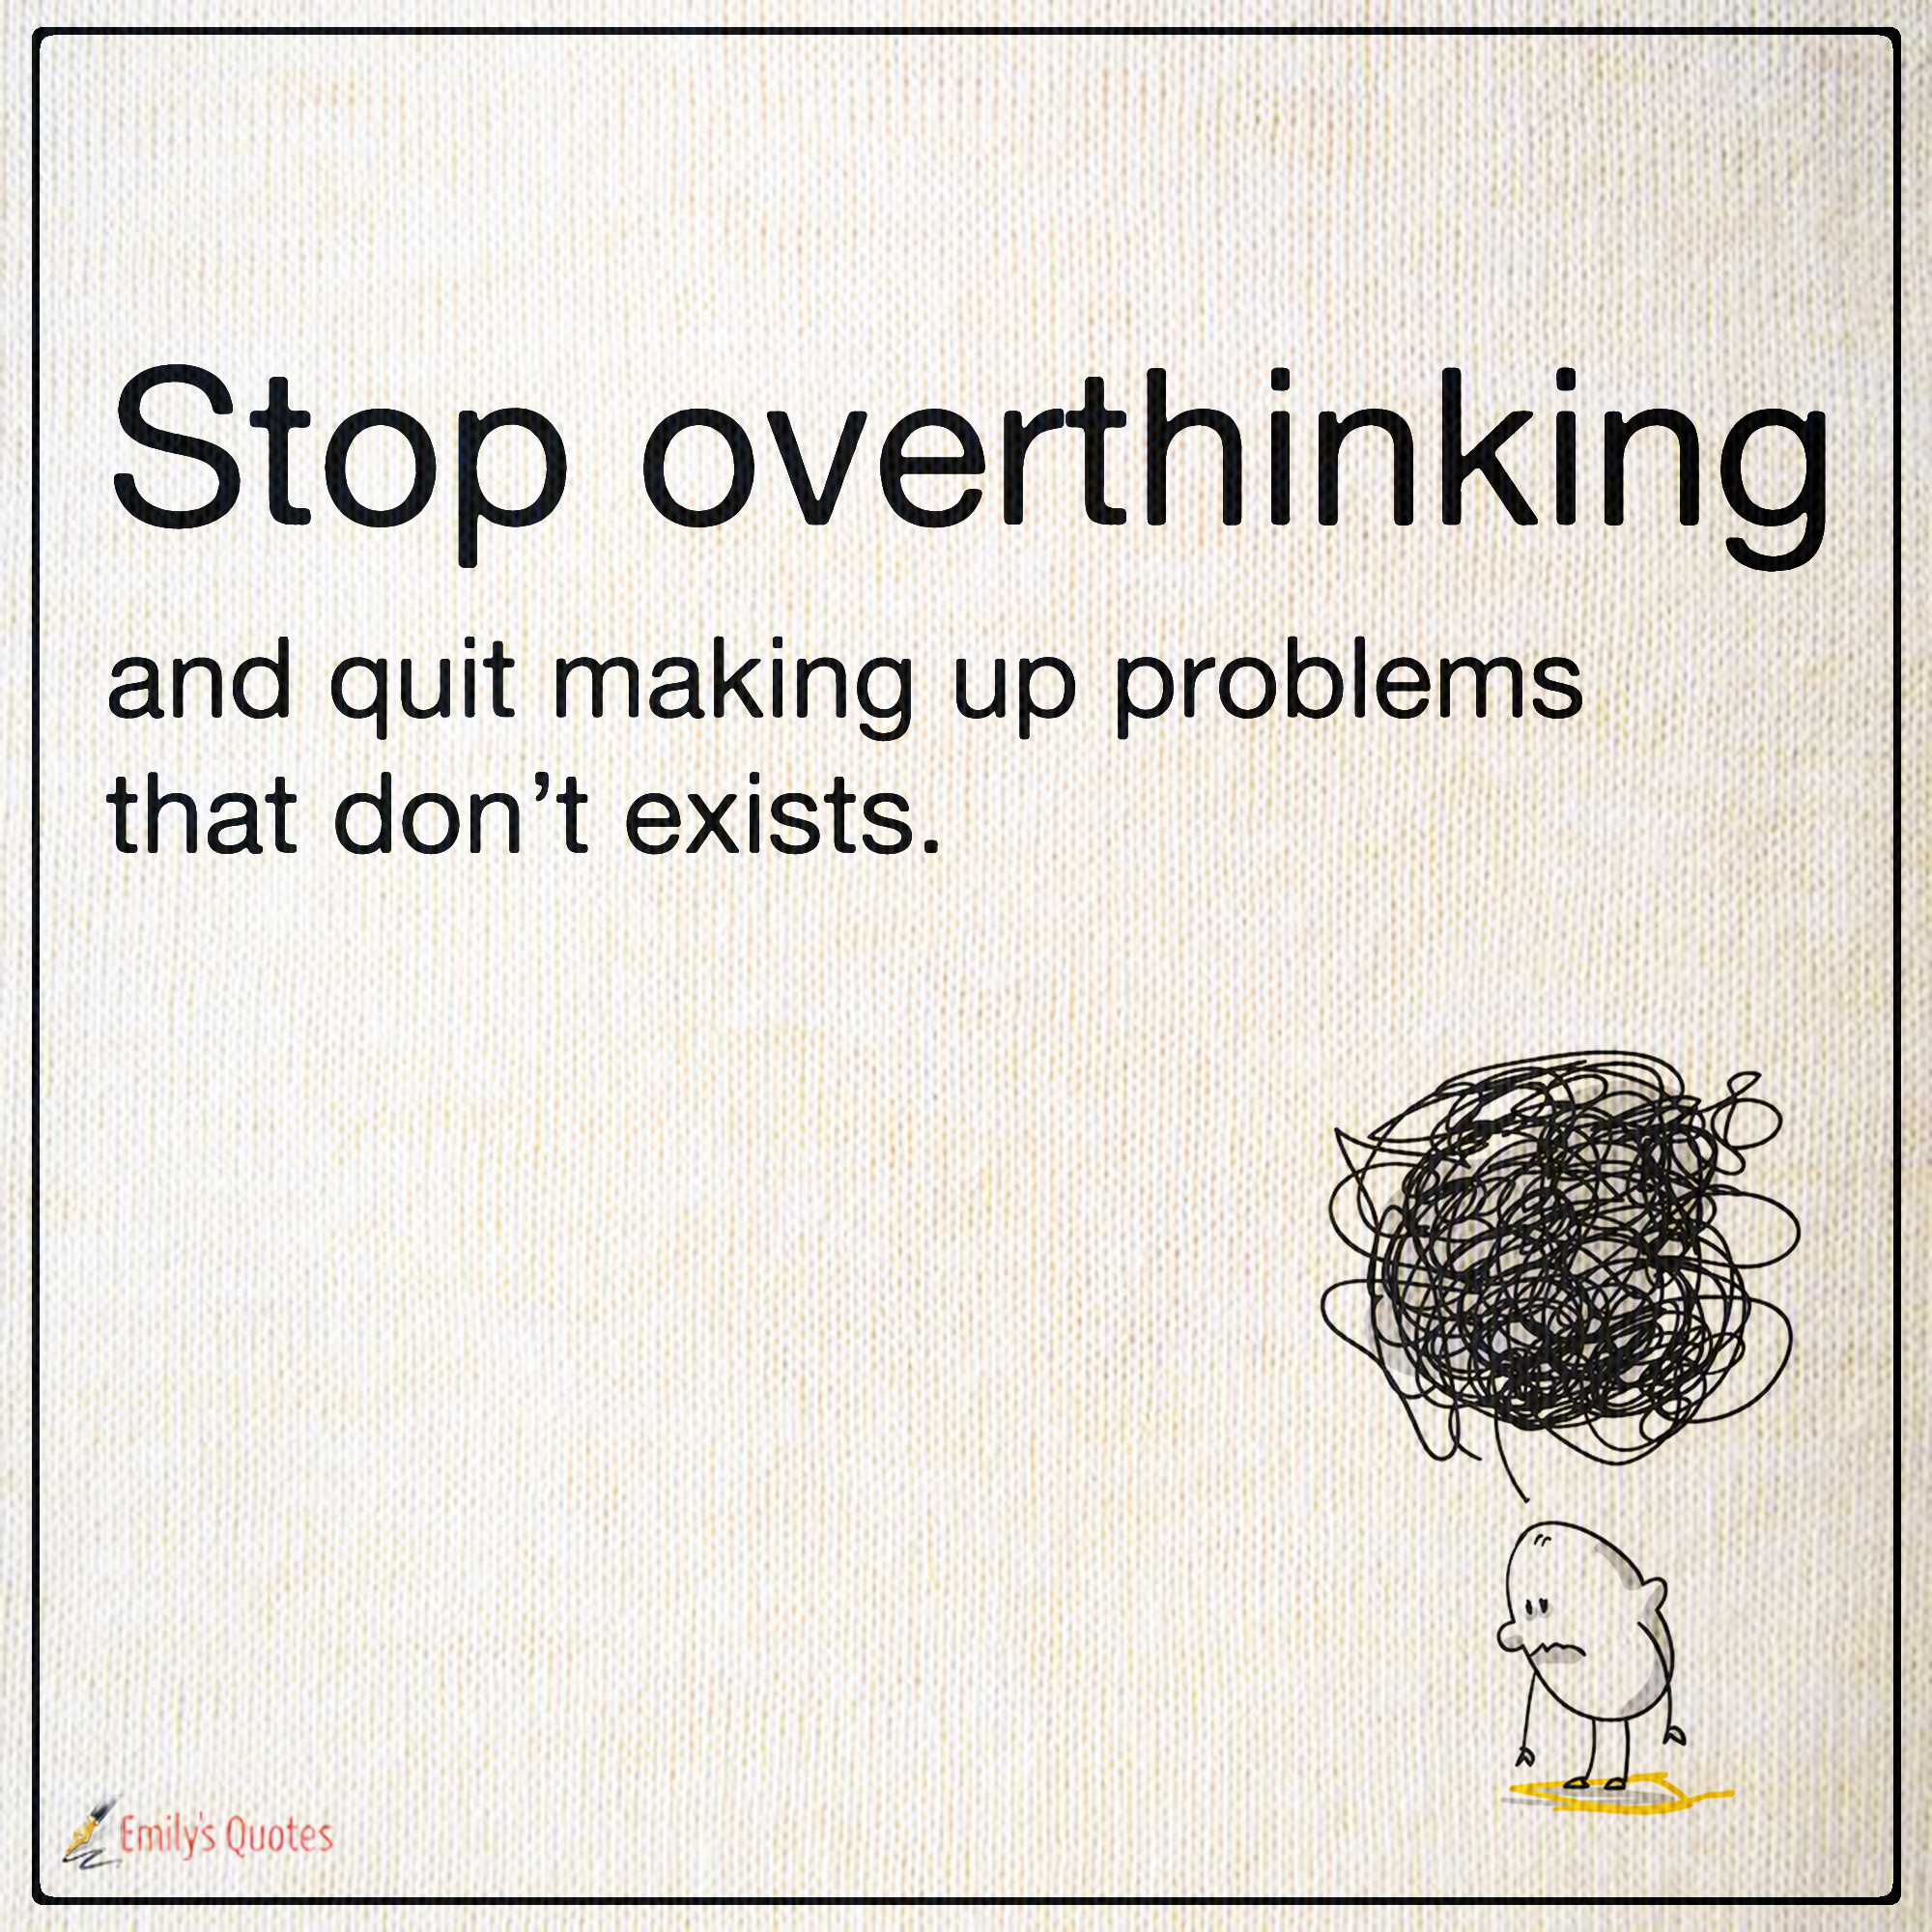 Stop overthinking and quit making up problems that don’t exists